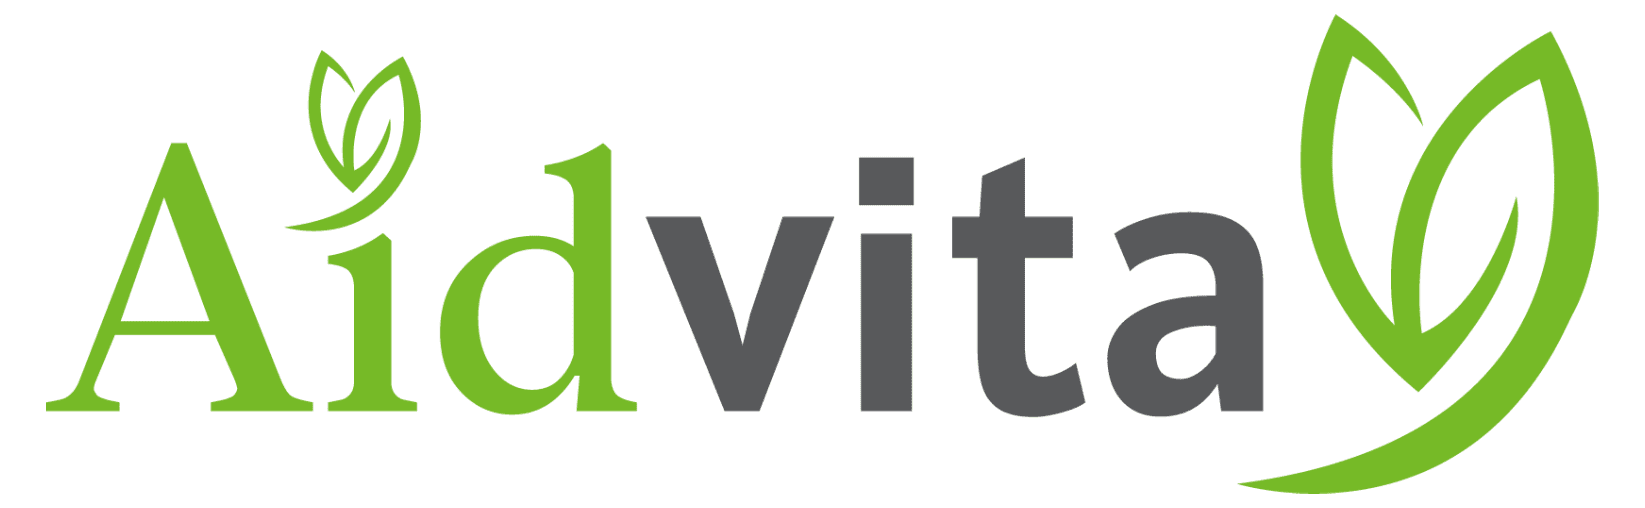 Aidvita | Natural Wellness Solutions | Backed by Science